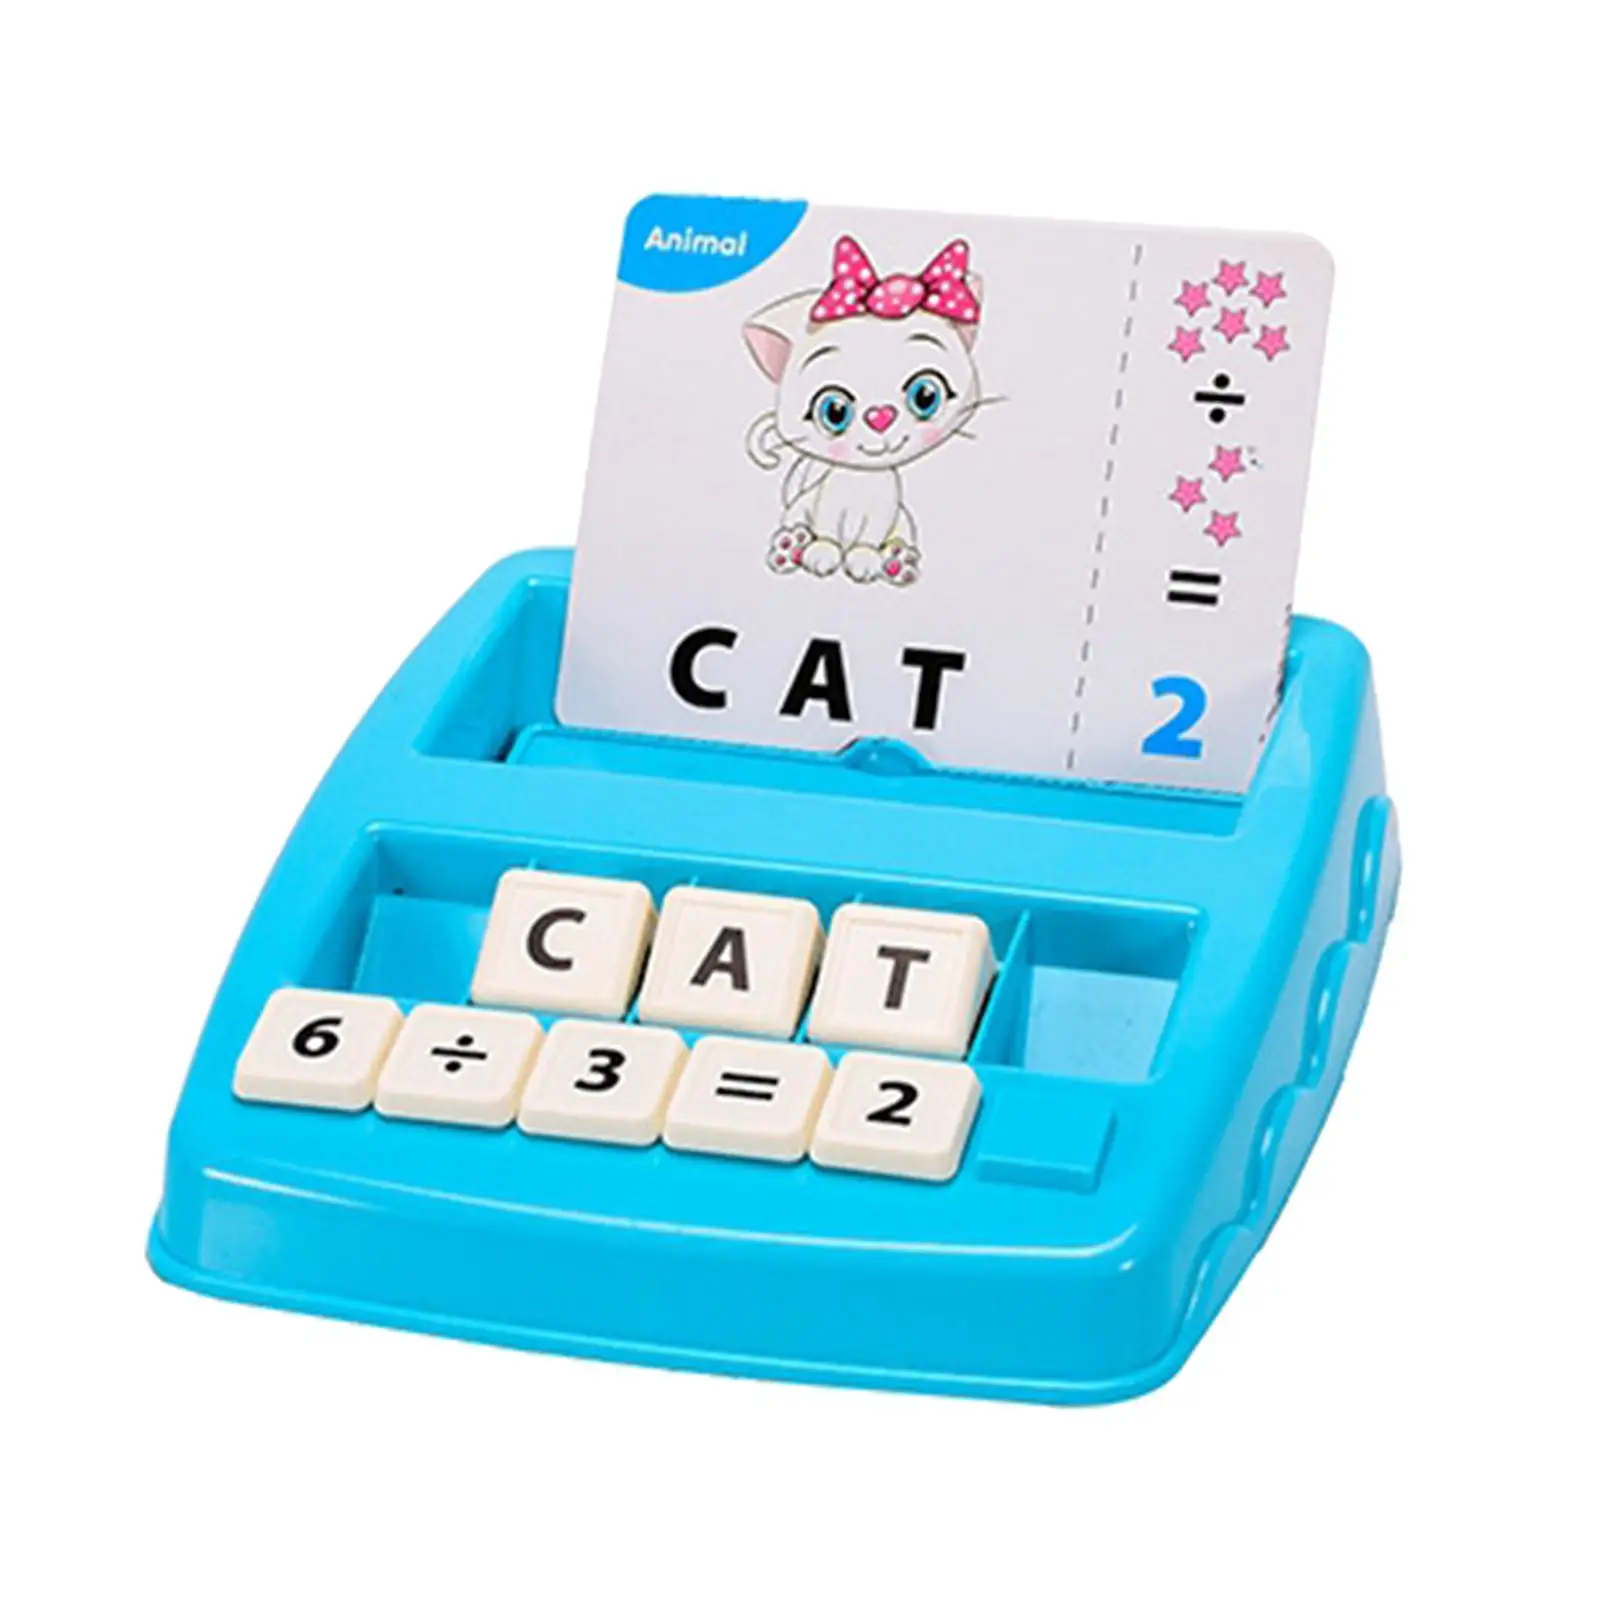 2 in 1 Spelling Reading Game Kindergarten Teaching Tools for Age 3 4 5 6 7 Children Boys and Girls Birthday Gifts